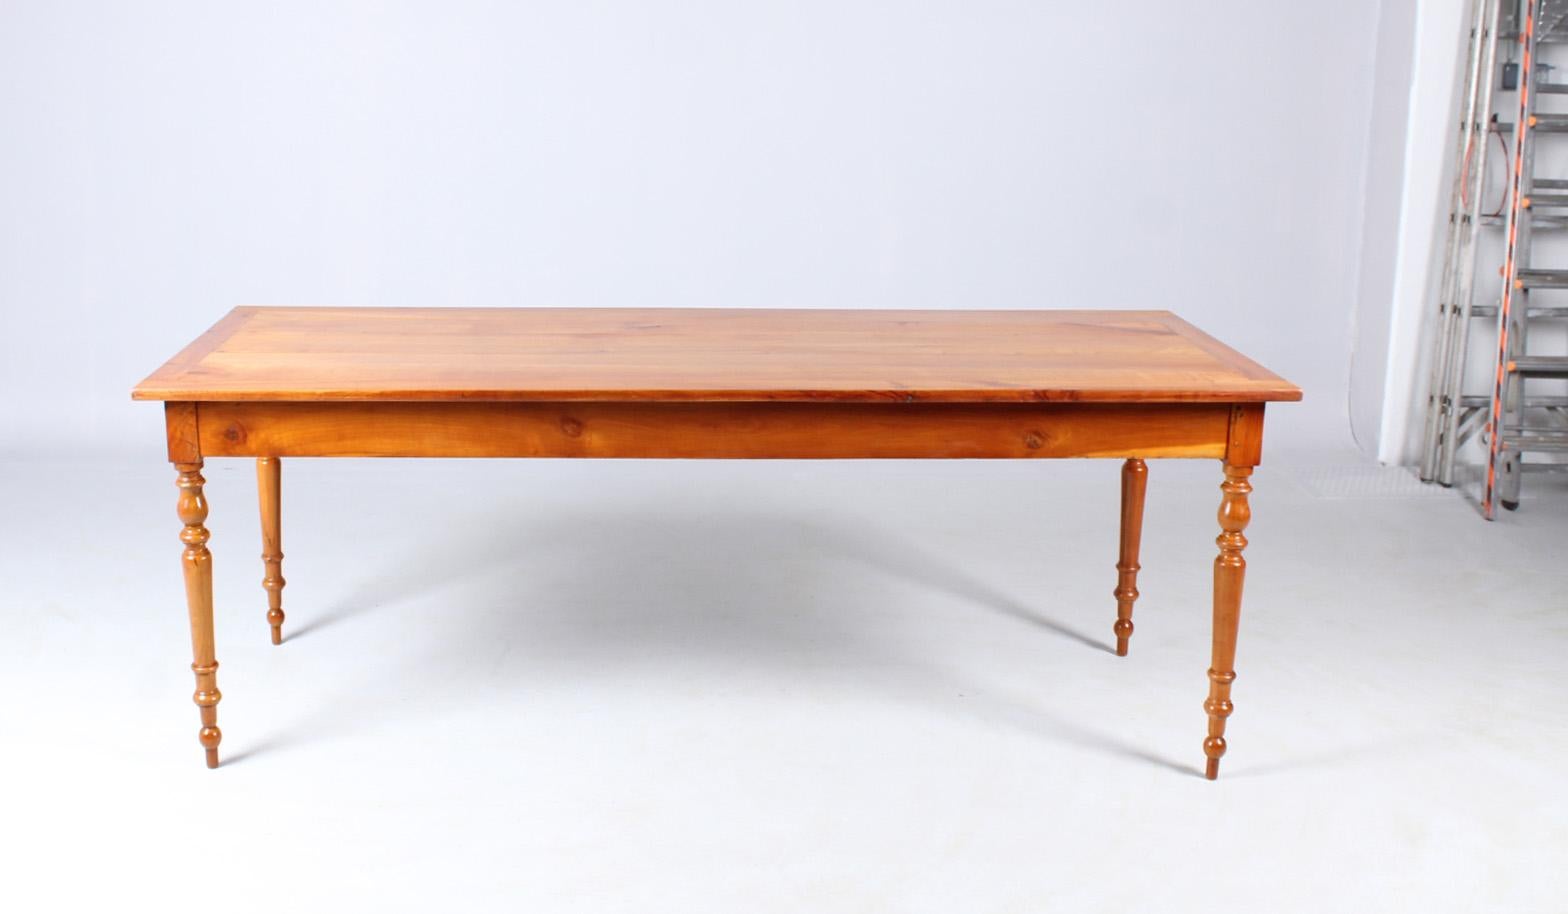 20th Century Antique French Farmhouse Dining Room Table, Cherrywood, with Extension